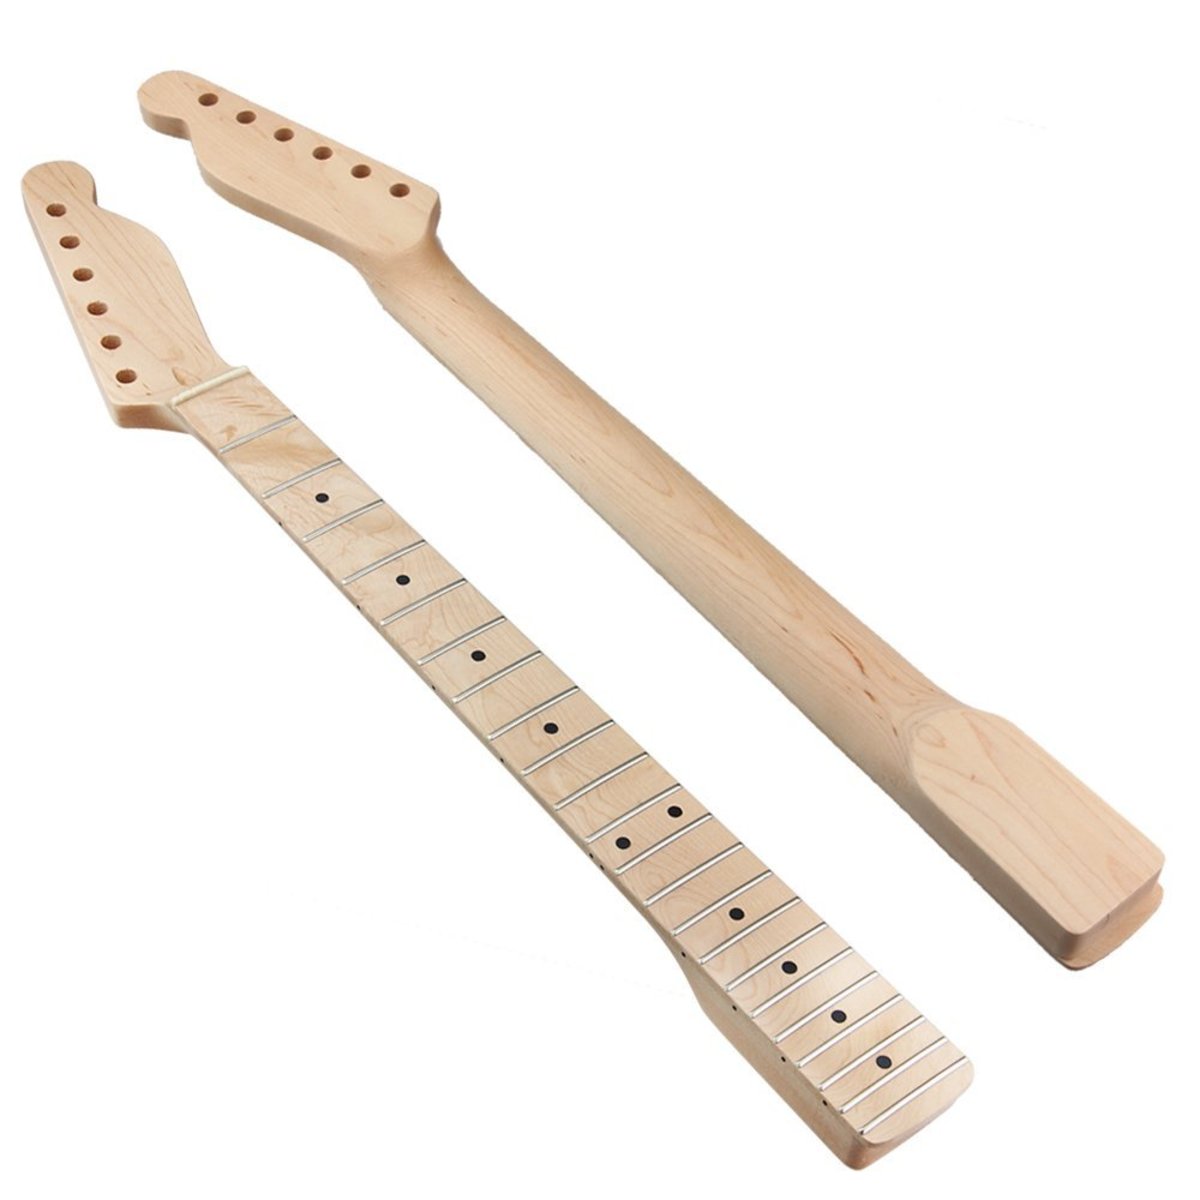 Much of the desired features of a guitar neck are determined by what is comfortable for the player.